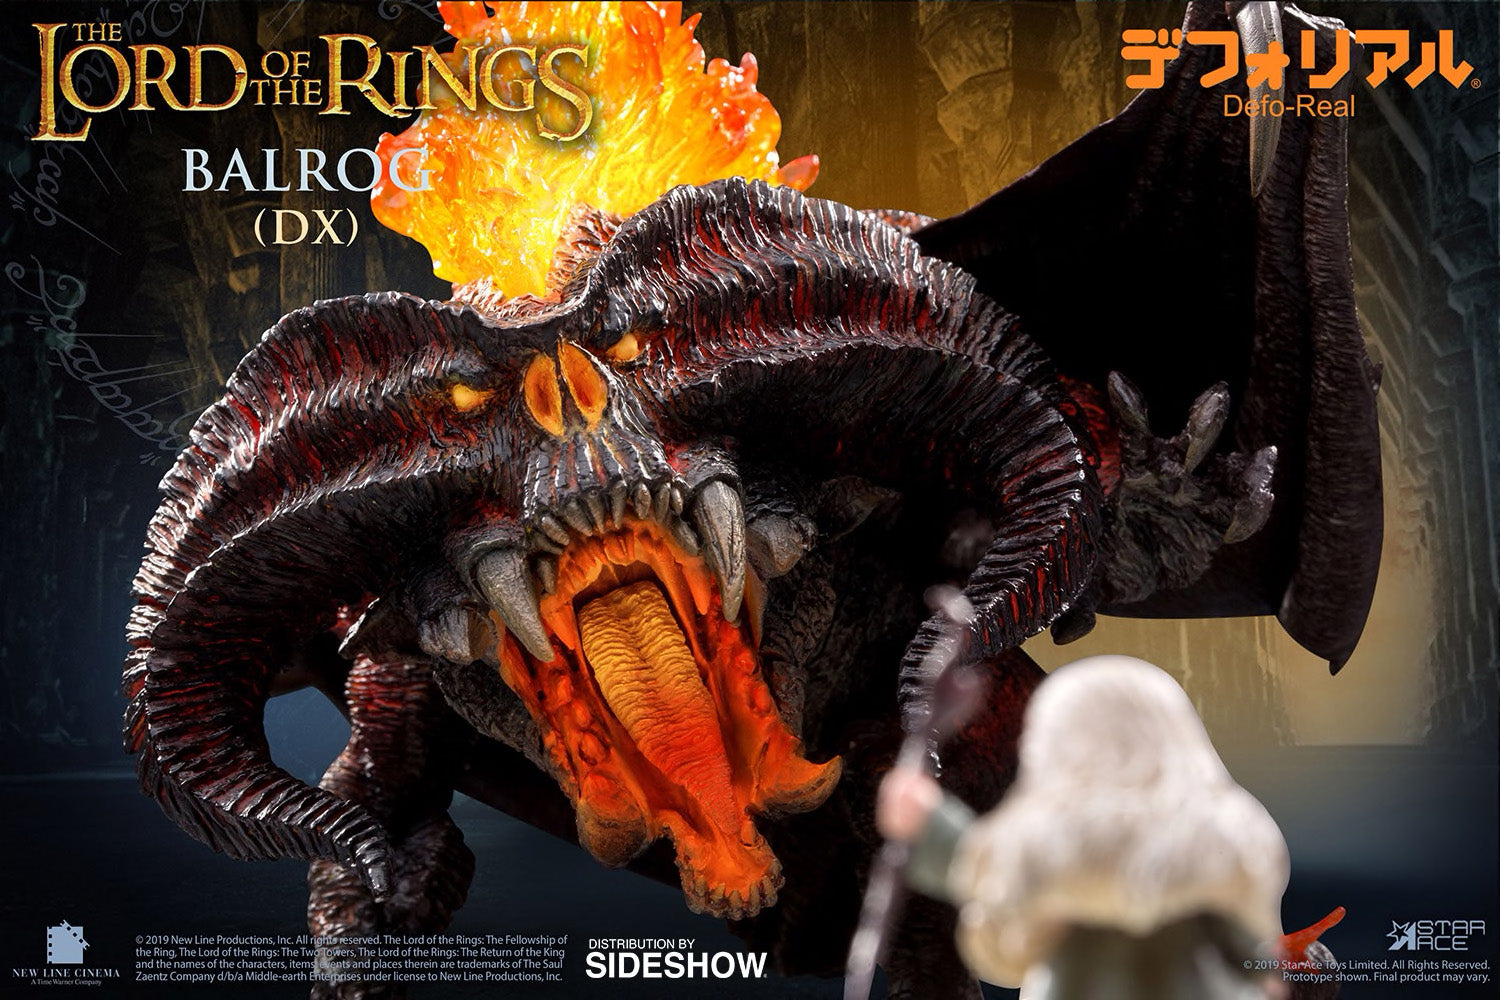 Star Ace Toys - Defo-Real - The Lord of the Rings - Balrog with Gandalf (DX) - Marvelous Toys